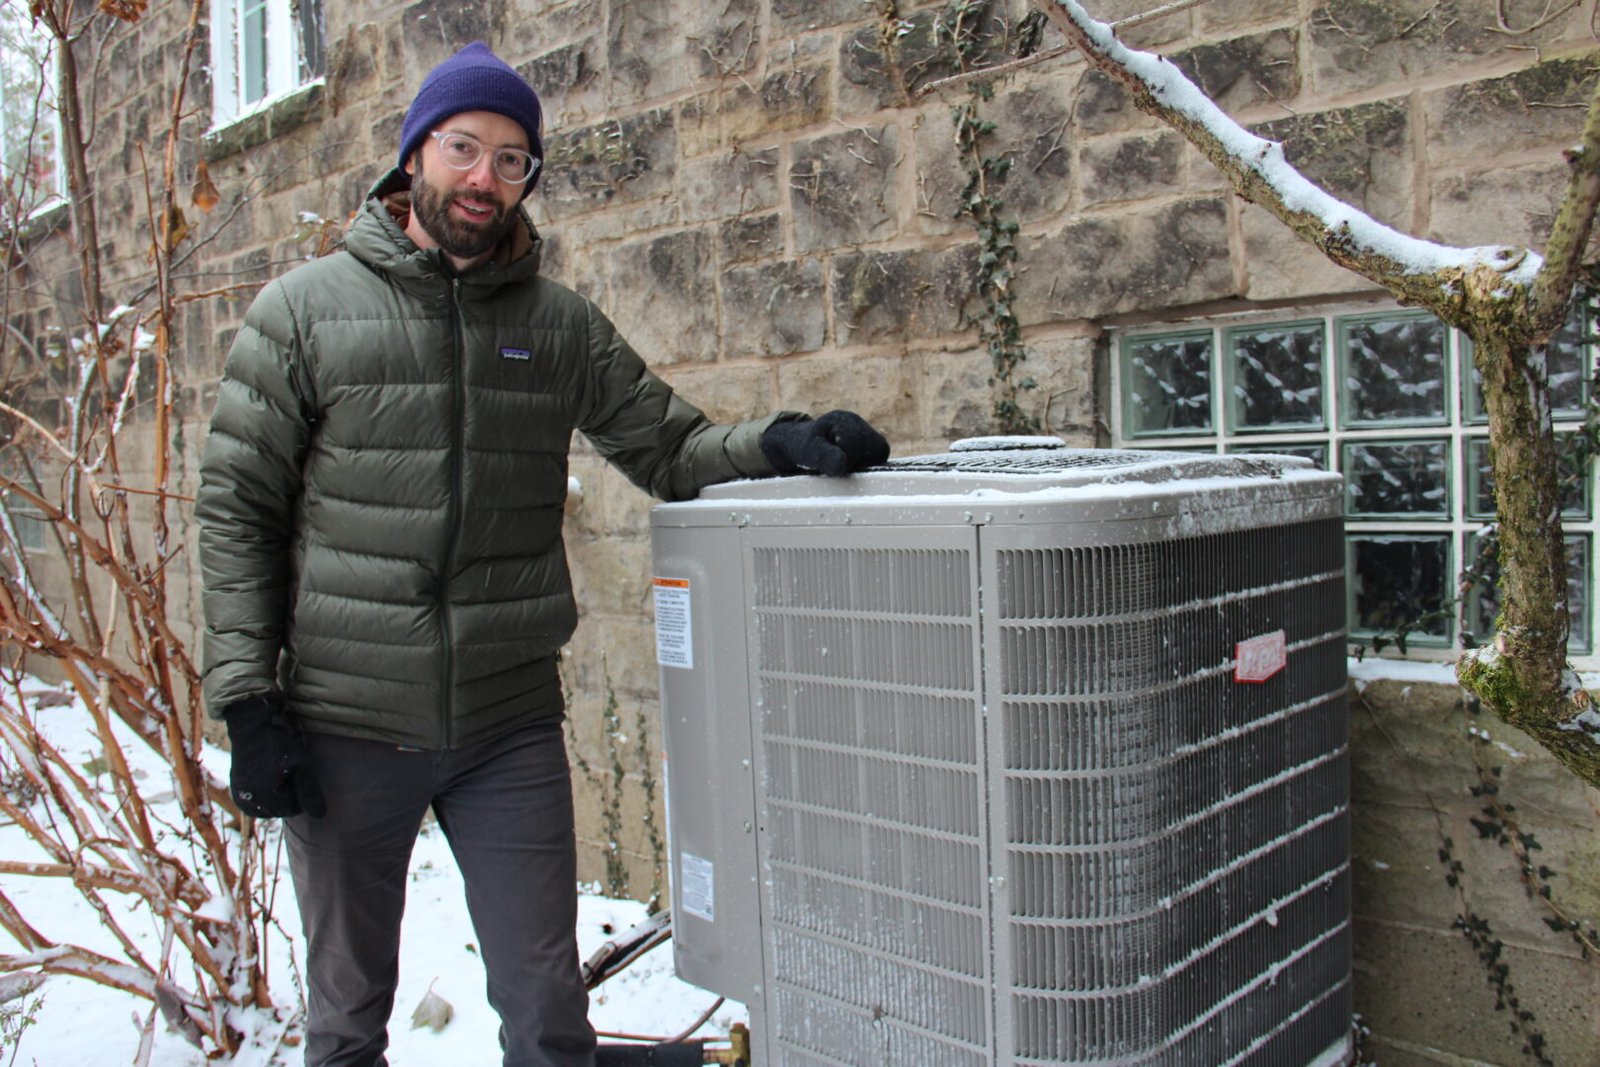 Heat Pumps: Millions to Gain, But High Cost Remains a Chill Wind